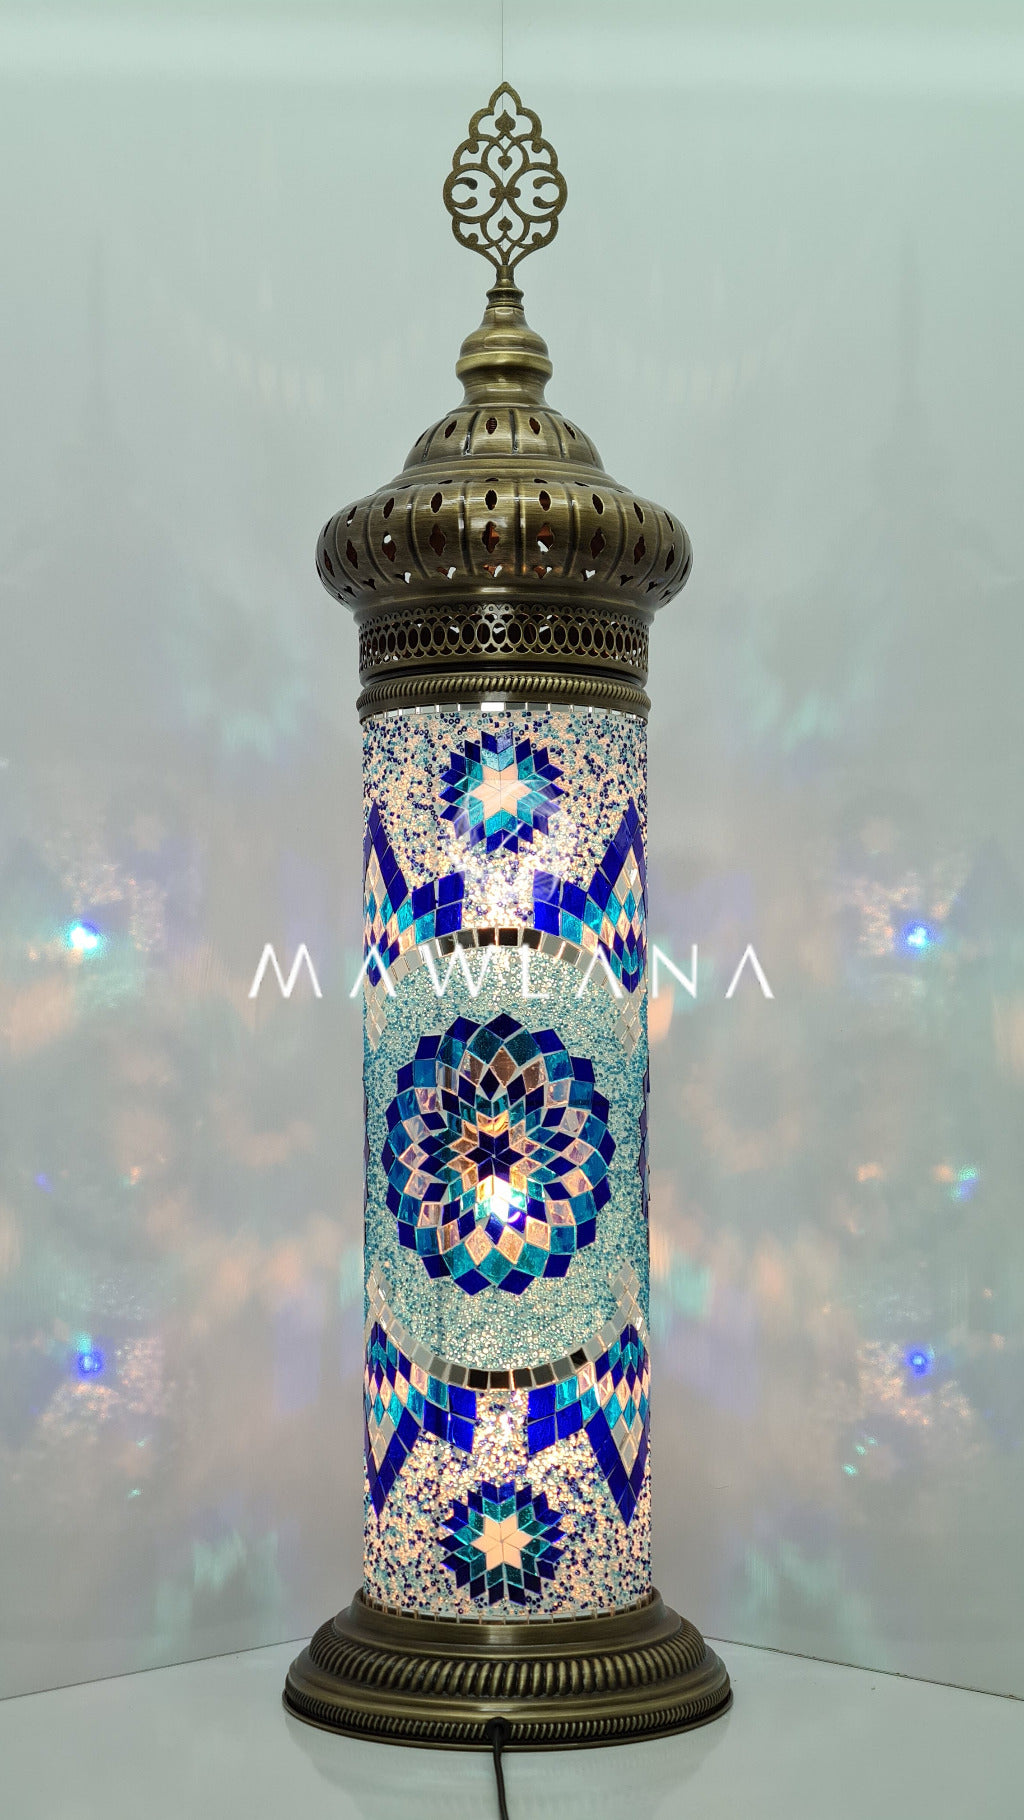 Cylinder Mosaic Turkish Glass Lamp with Brass Table Top Lamp - 50 CM x 15 CM